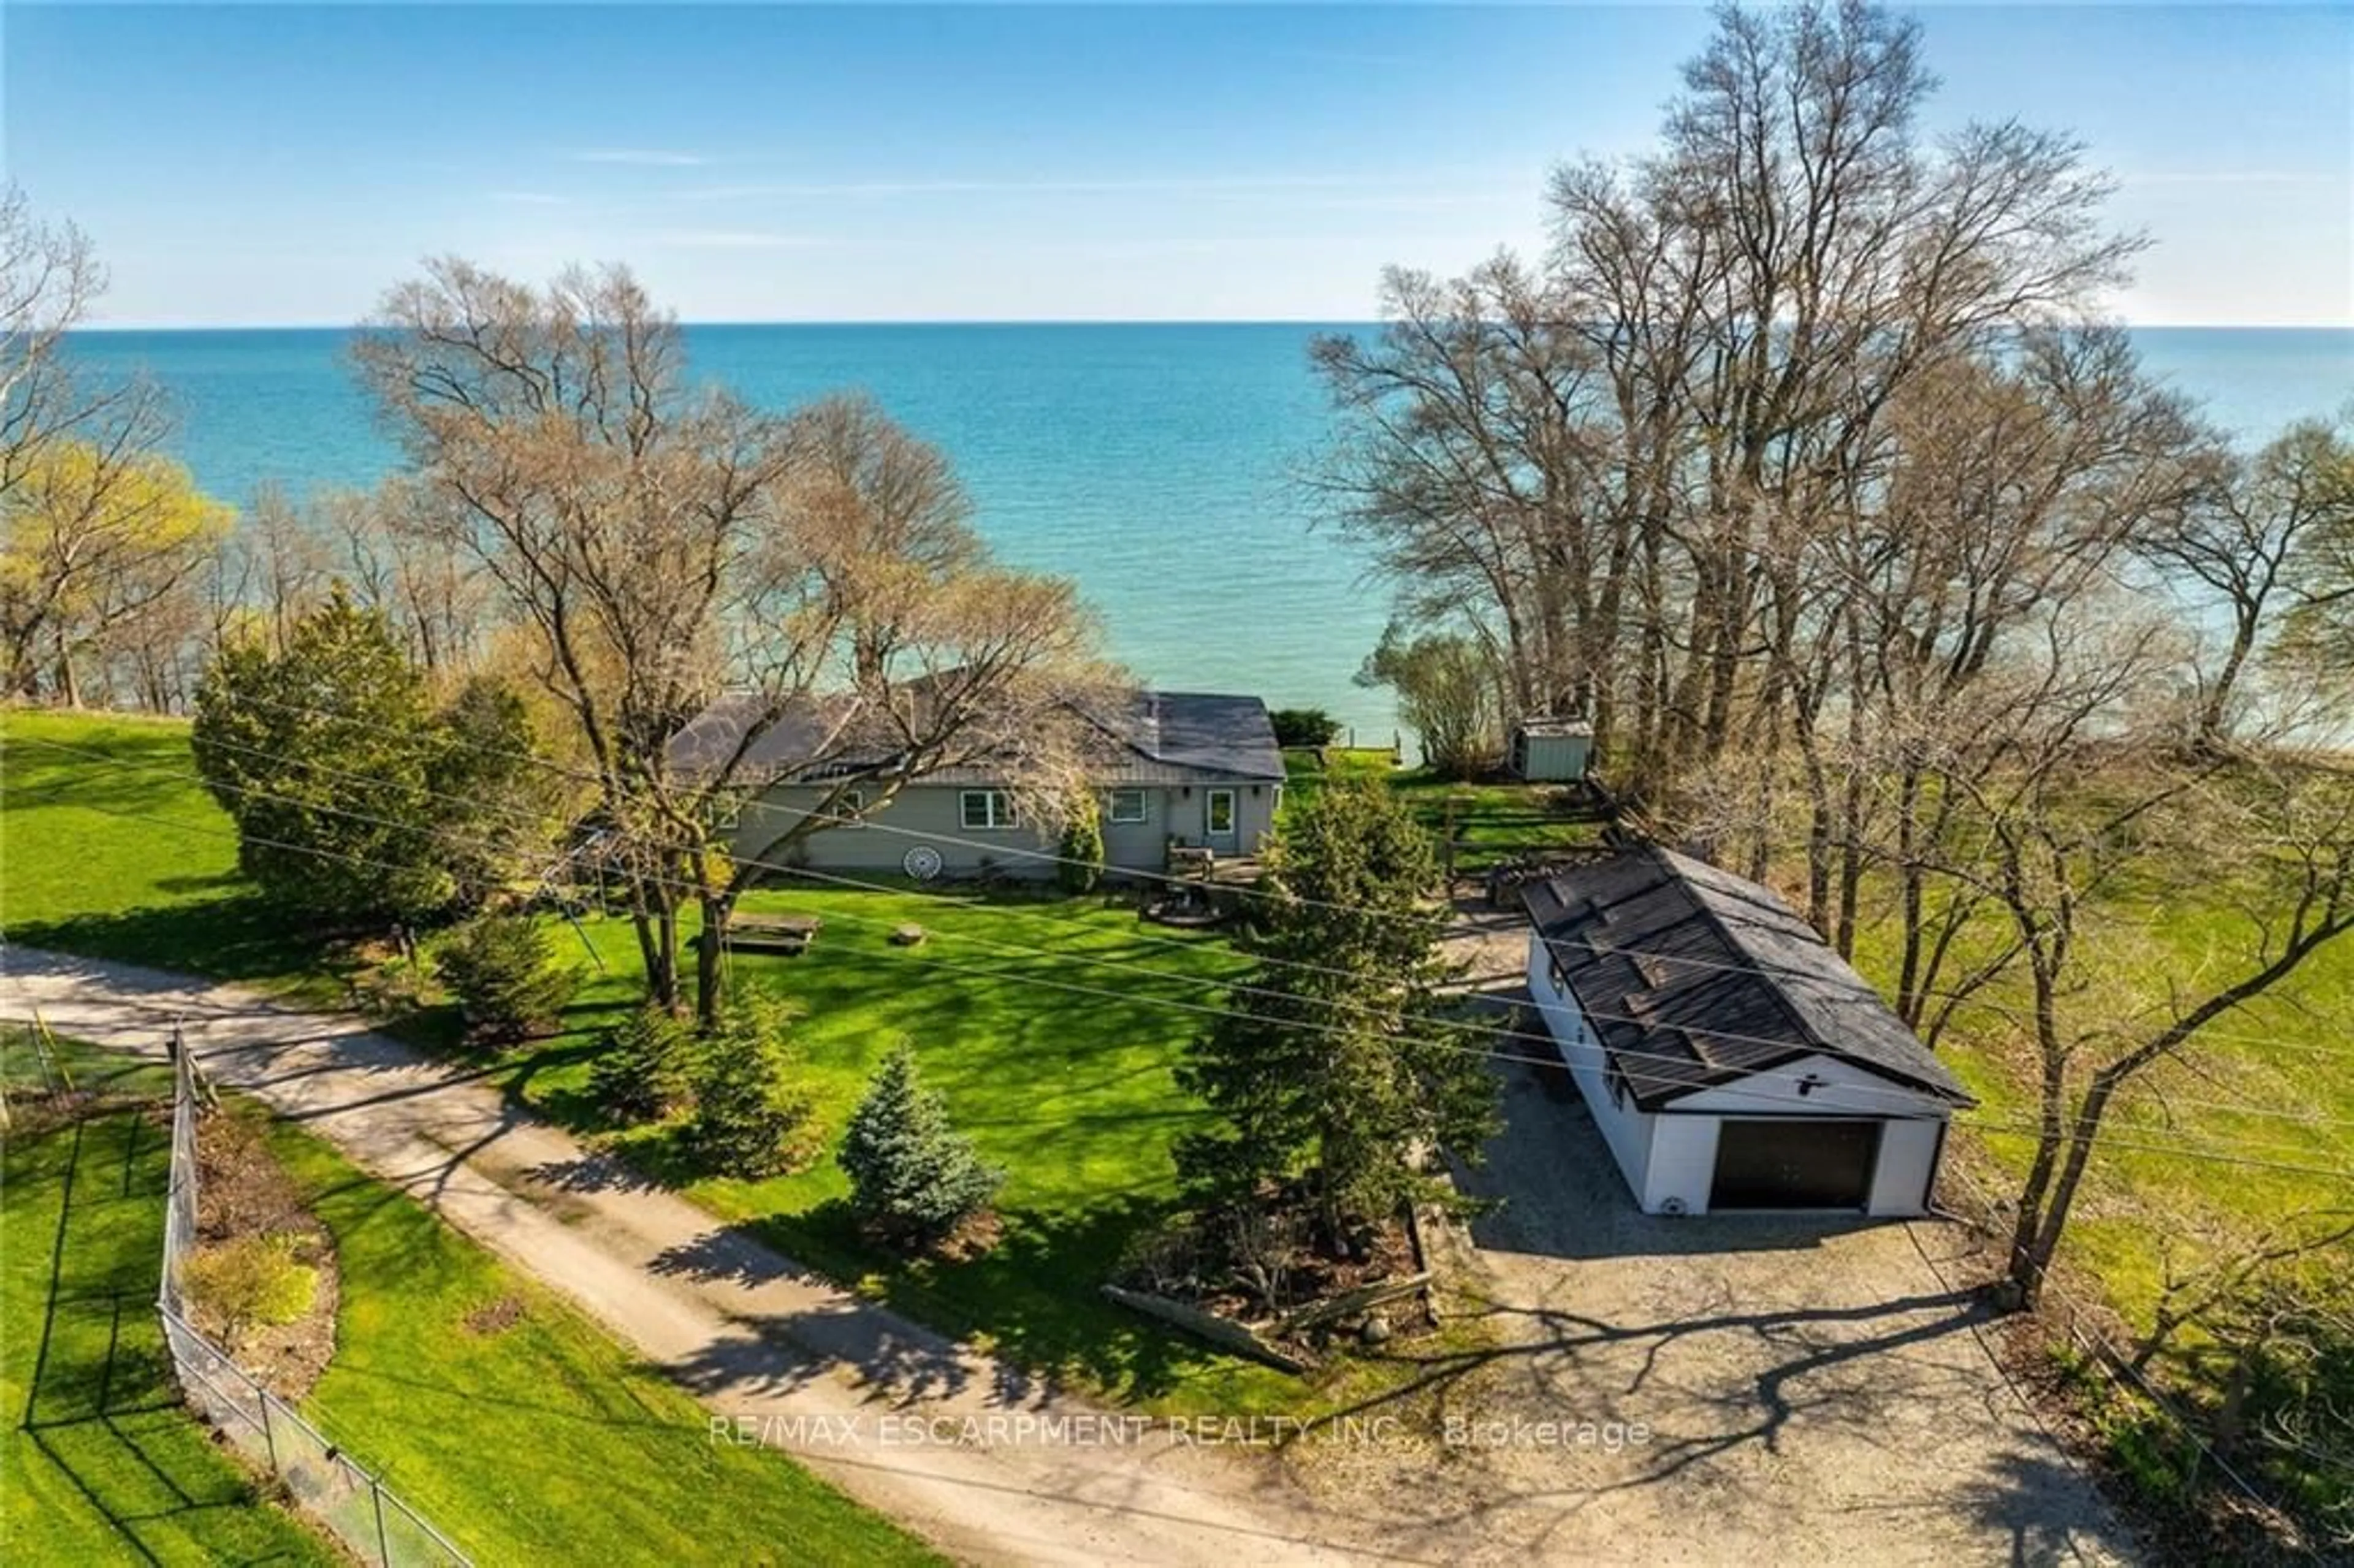 Lakeview for 66 Hickory Beach Lane, Haldimand Ontario N0A 1L0